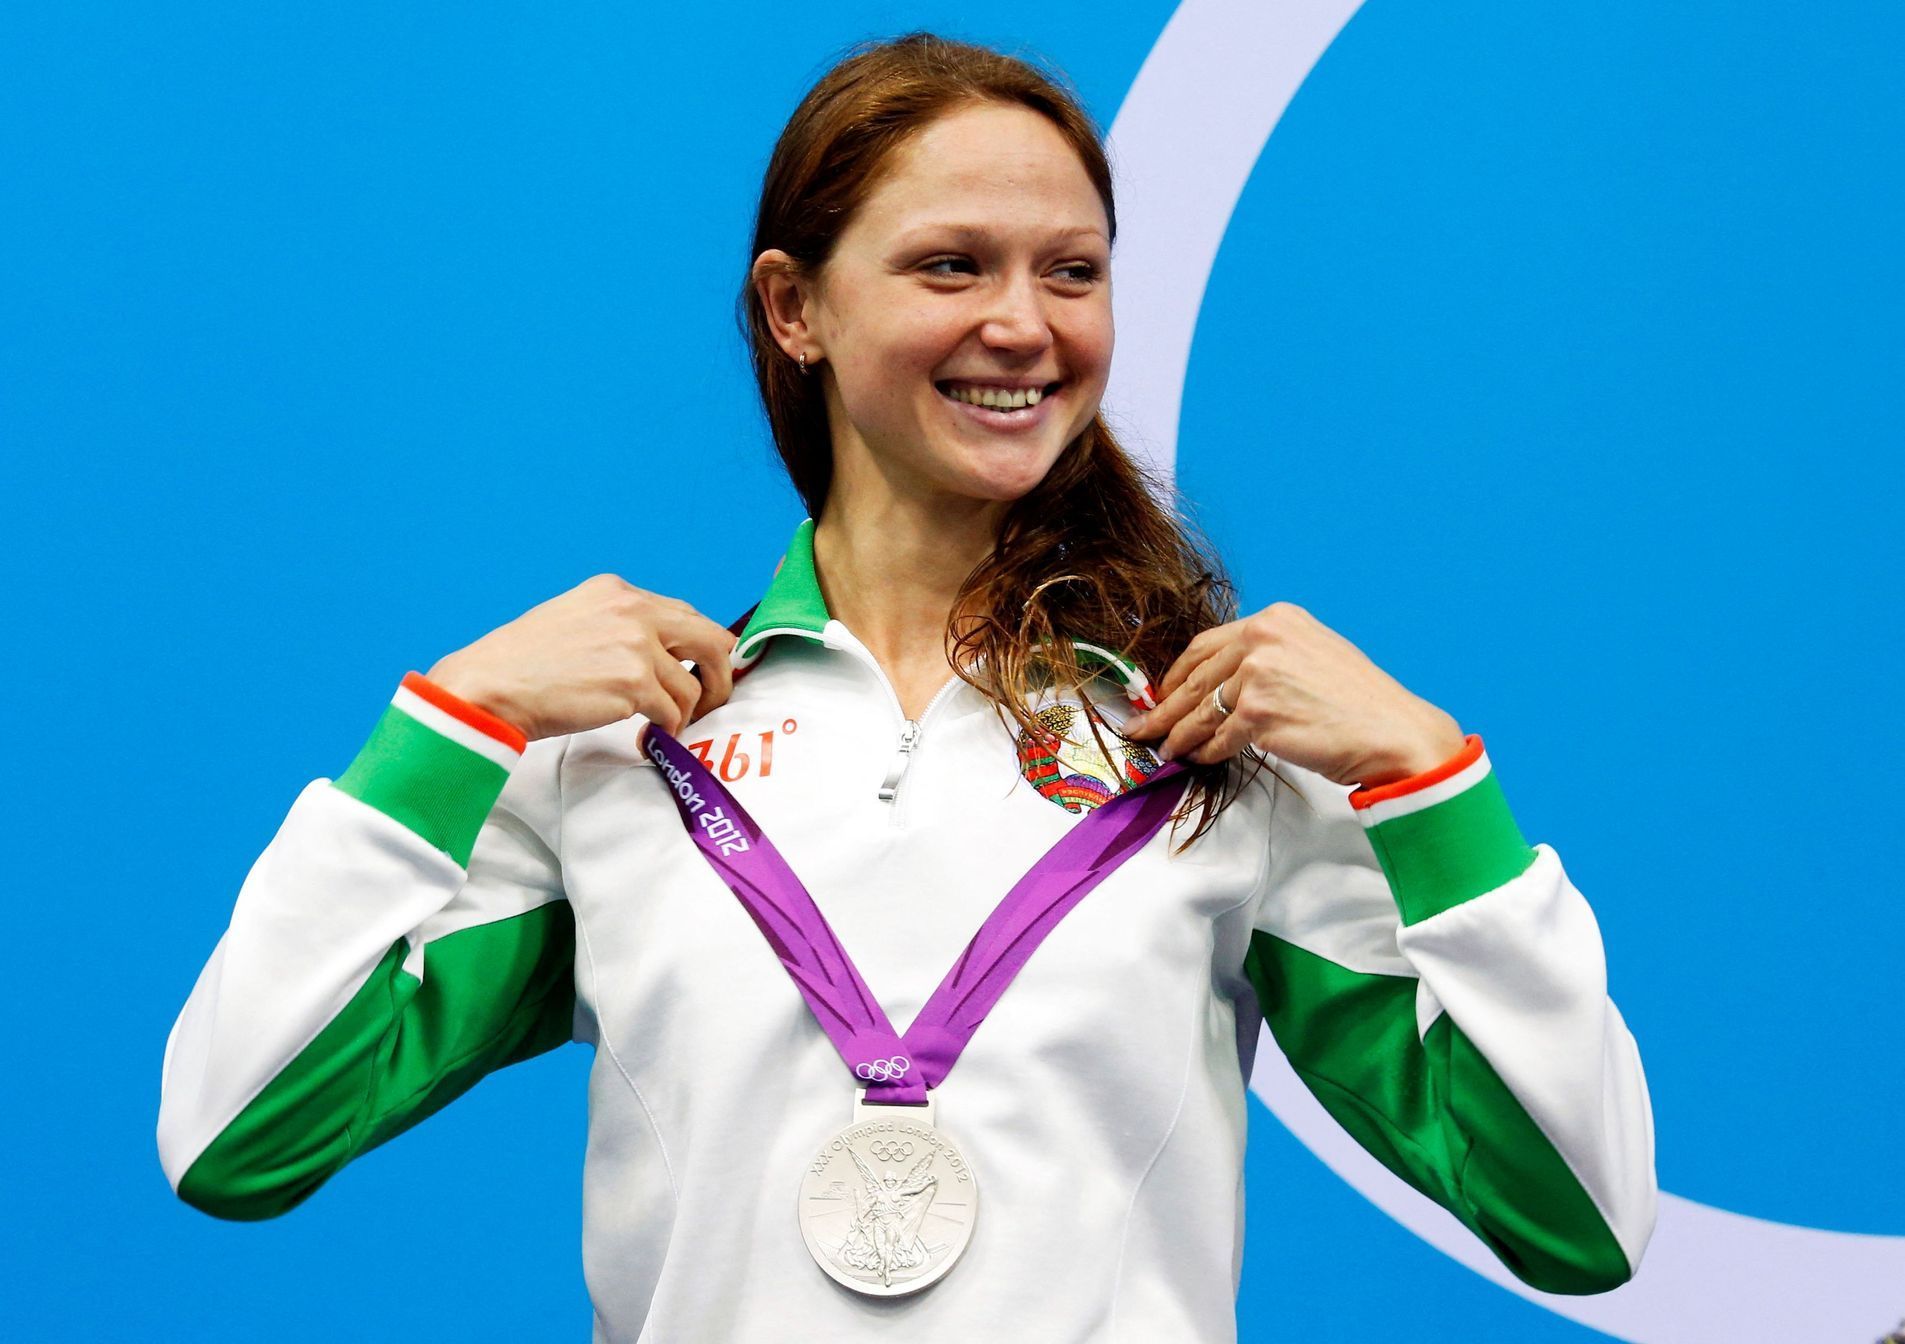 FILE PHOTO: Belarus' Aliaksandra Herasimenia smiles with her silver medal during the women's 100m freestyle victory ceremony during the London 2012 Olympic Games at the Aquatics Centre